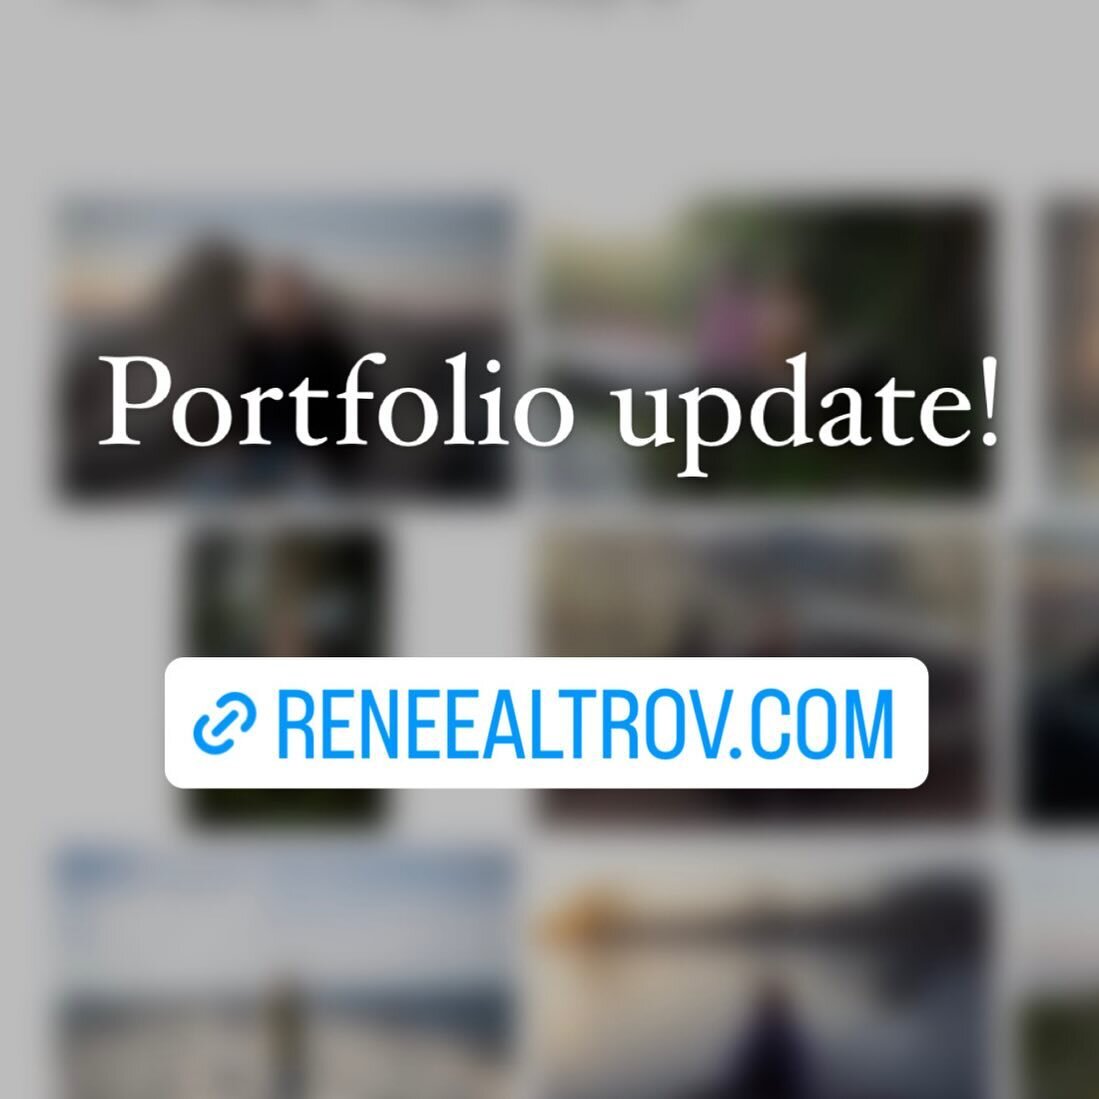 reneealtrov.com
I updated my portfolio! You are welcome to go and check it out but i advise you to use bigger screen for this. Link in profile!